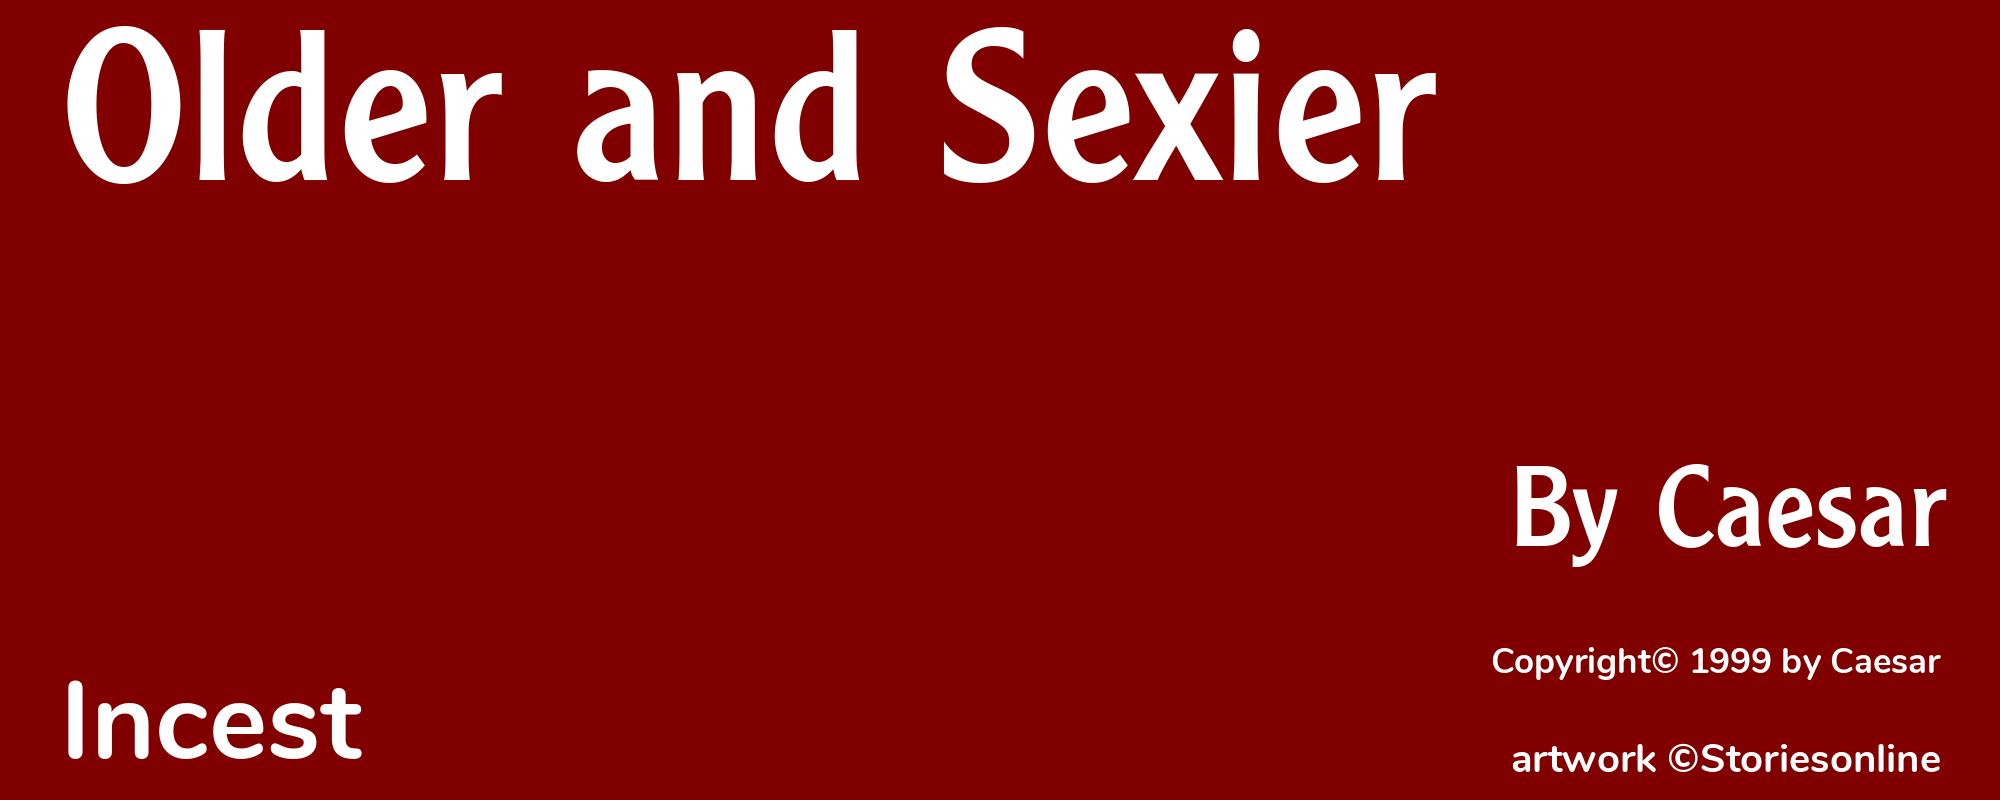 Older and Sexier - Cover